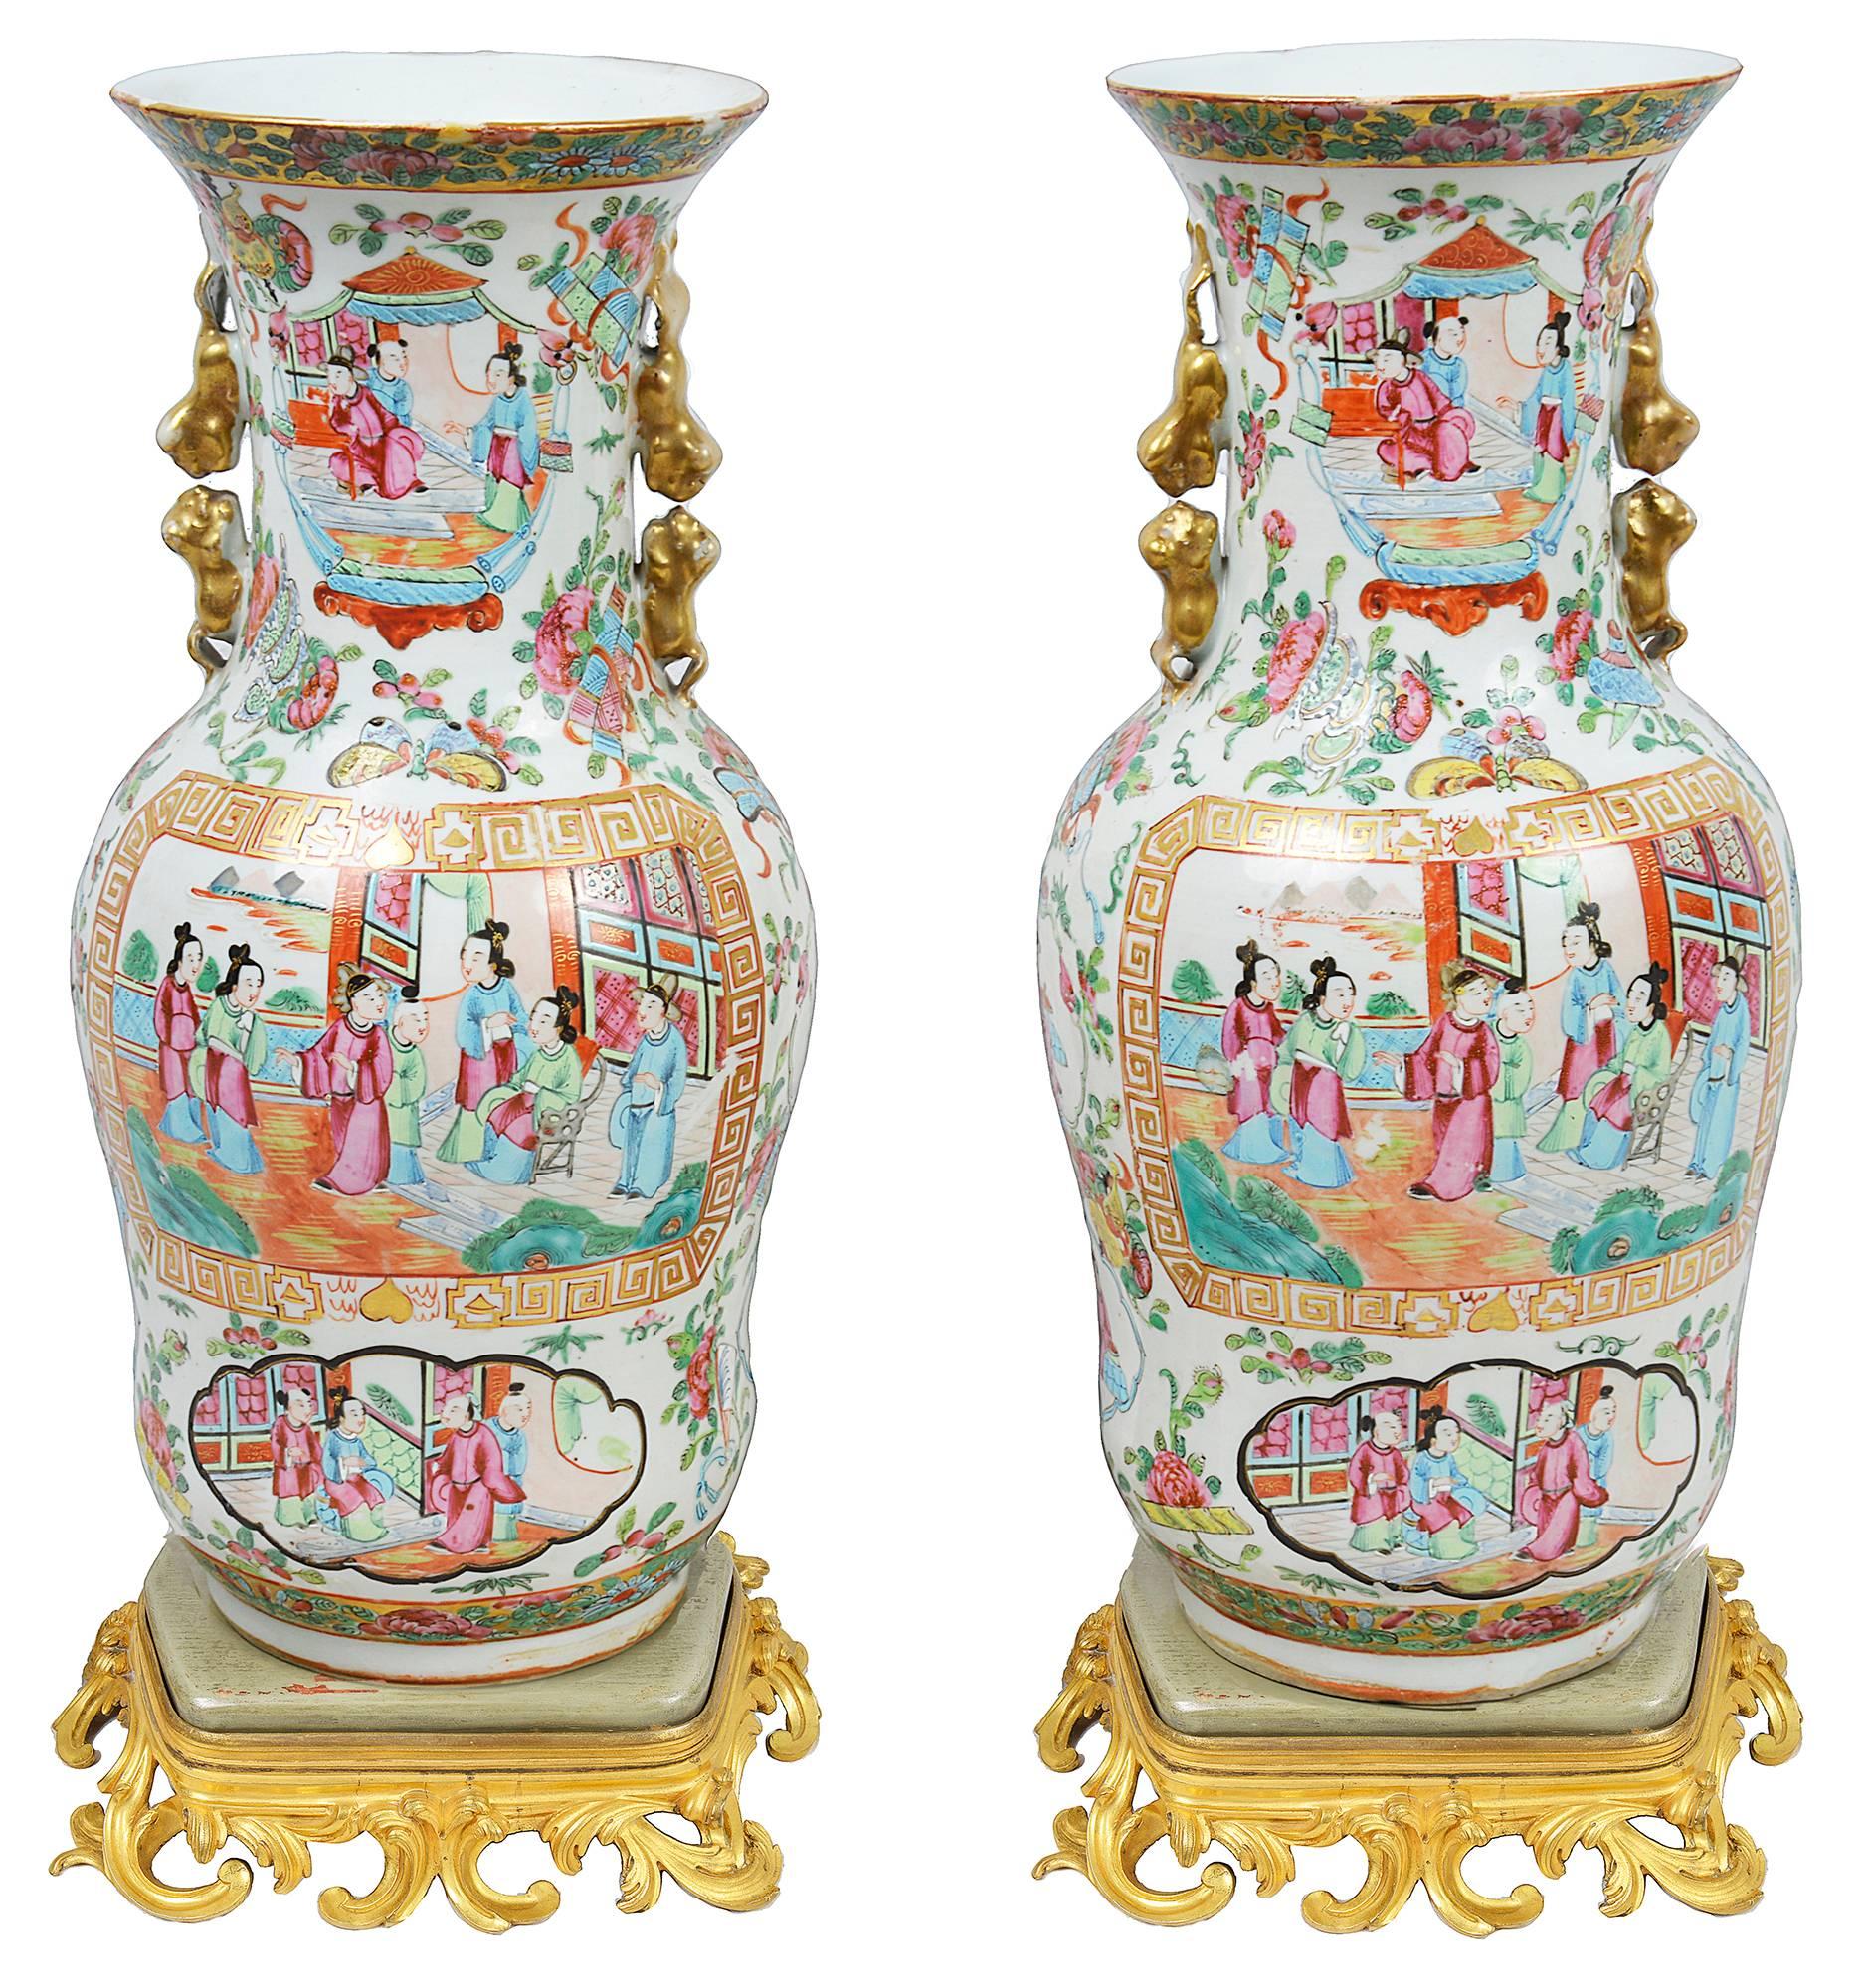 A very good quality pair of Chinese rose medallion Cantonese vases, each depicting classical oriental interior scenes, set in floral surrounds. Set on a pair of French gilded ormolu bases. (Not attached).